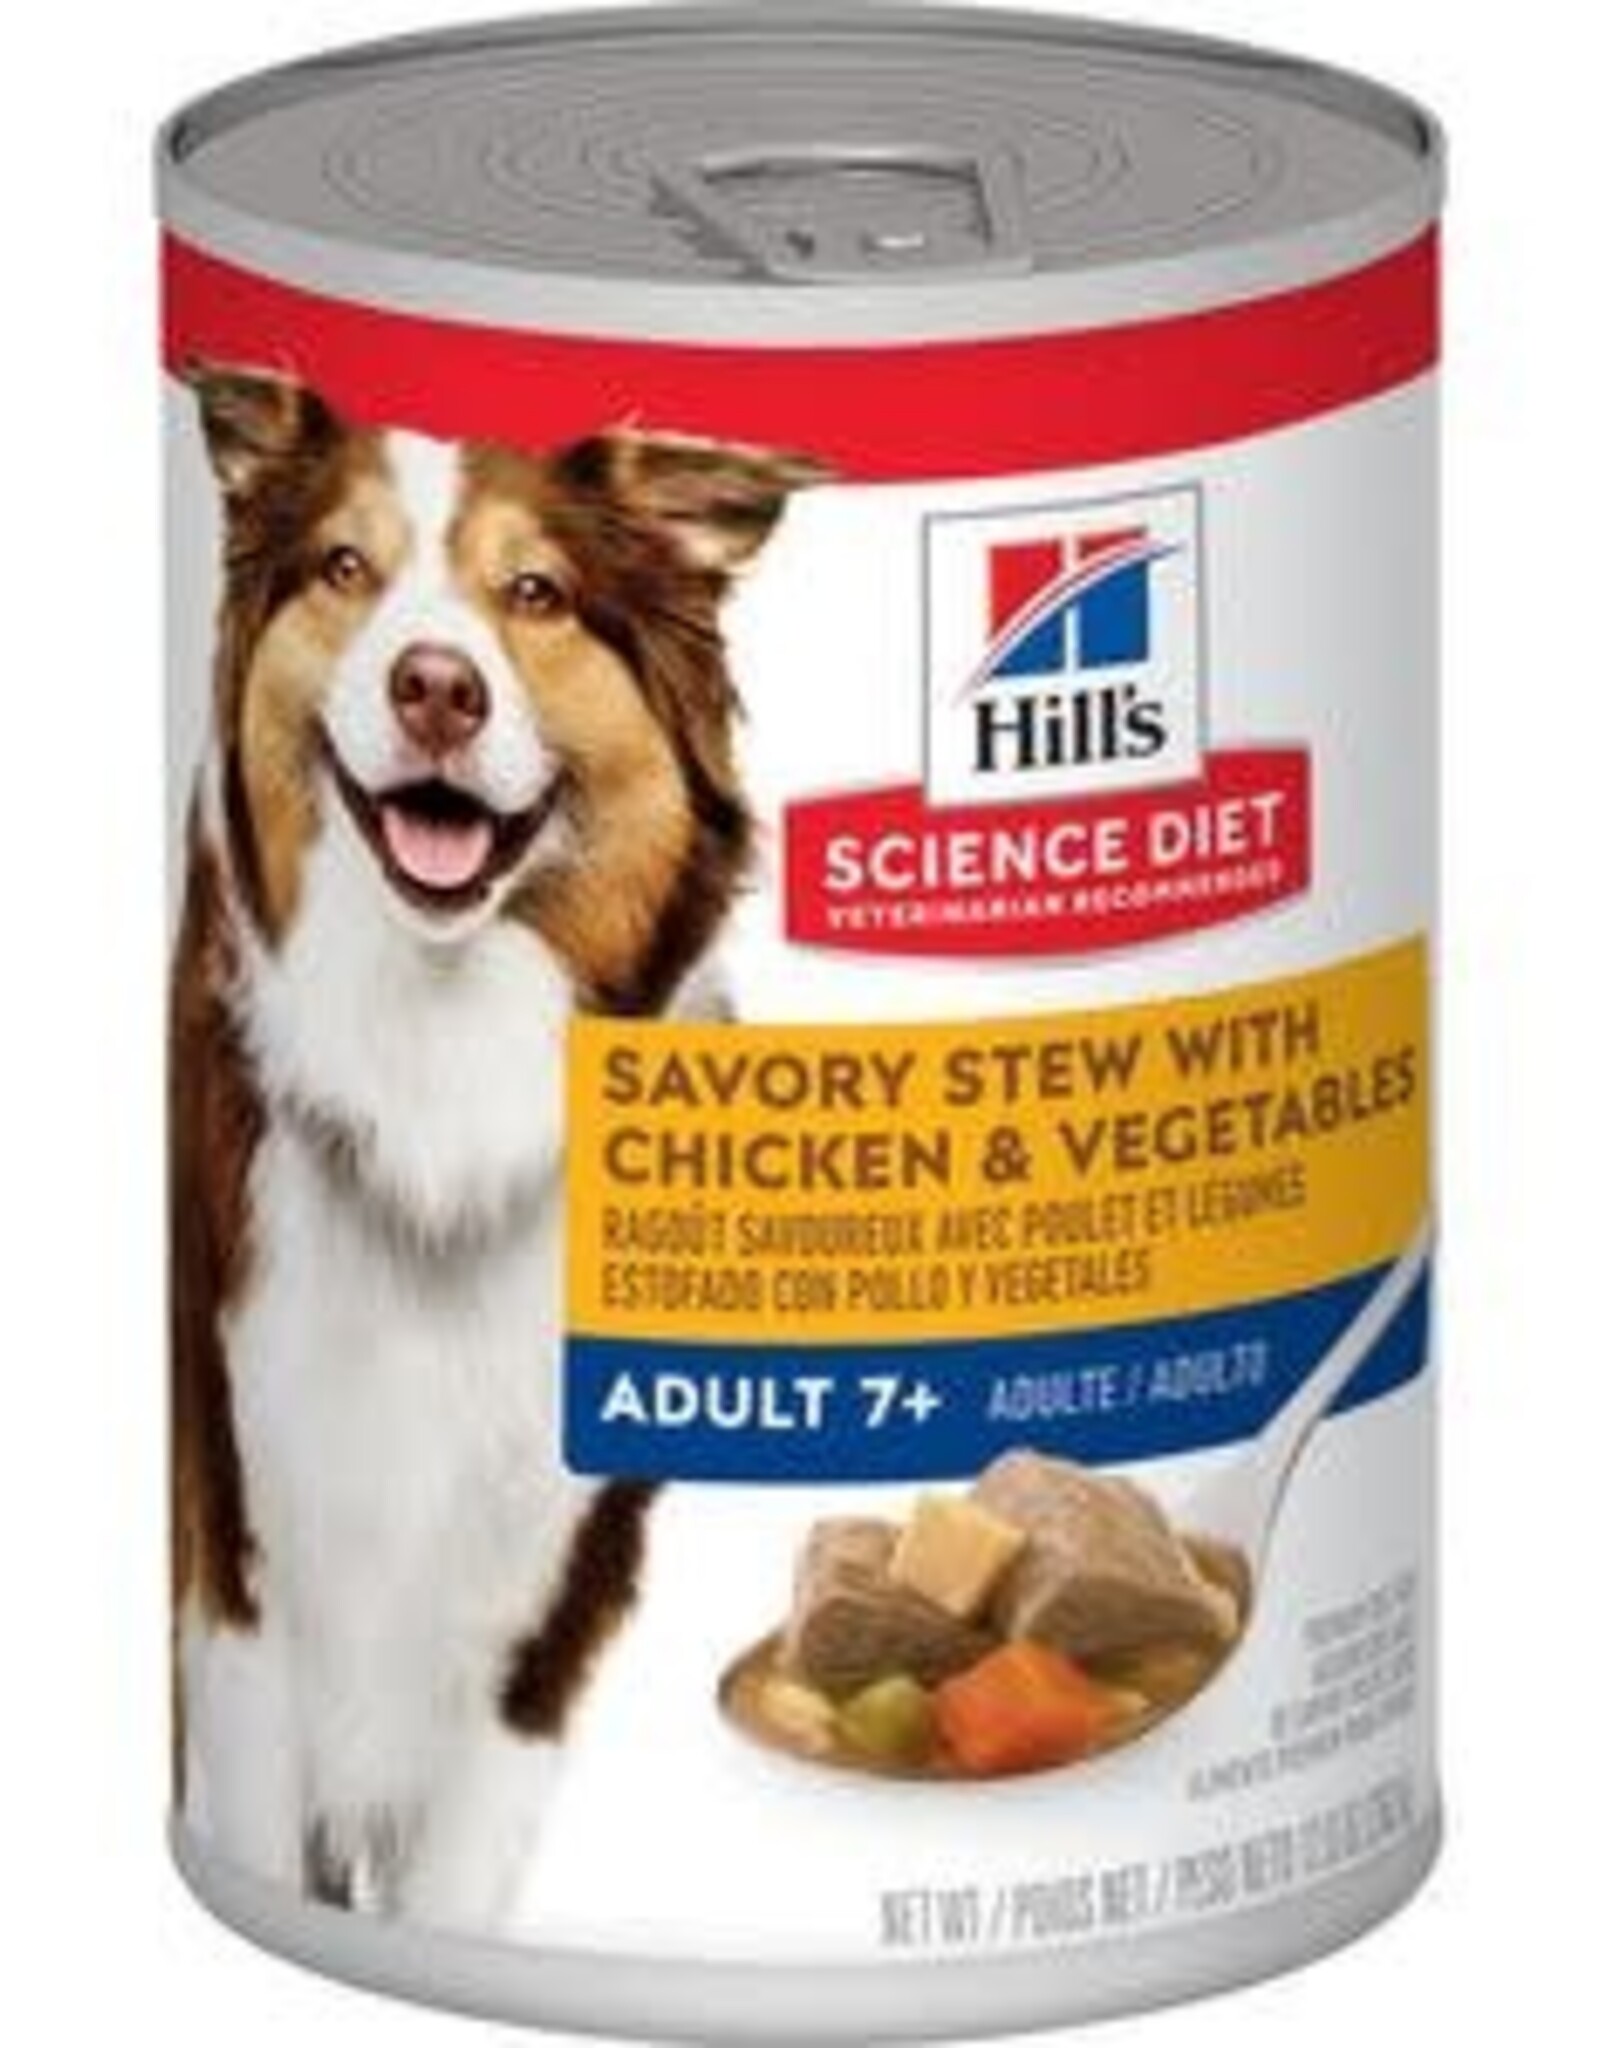 SCIENCE DIET HILL'S SCIENCE DIET DOG MATURE SAVORY STEW CHICKEN & VEGETABLES CAN 12.8OZ CASE OF 12